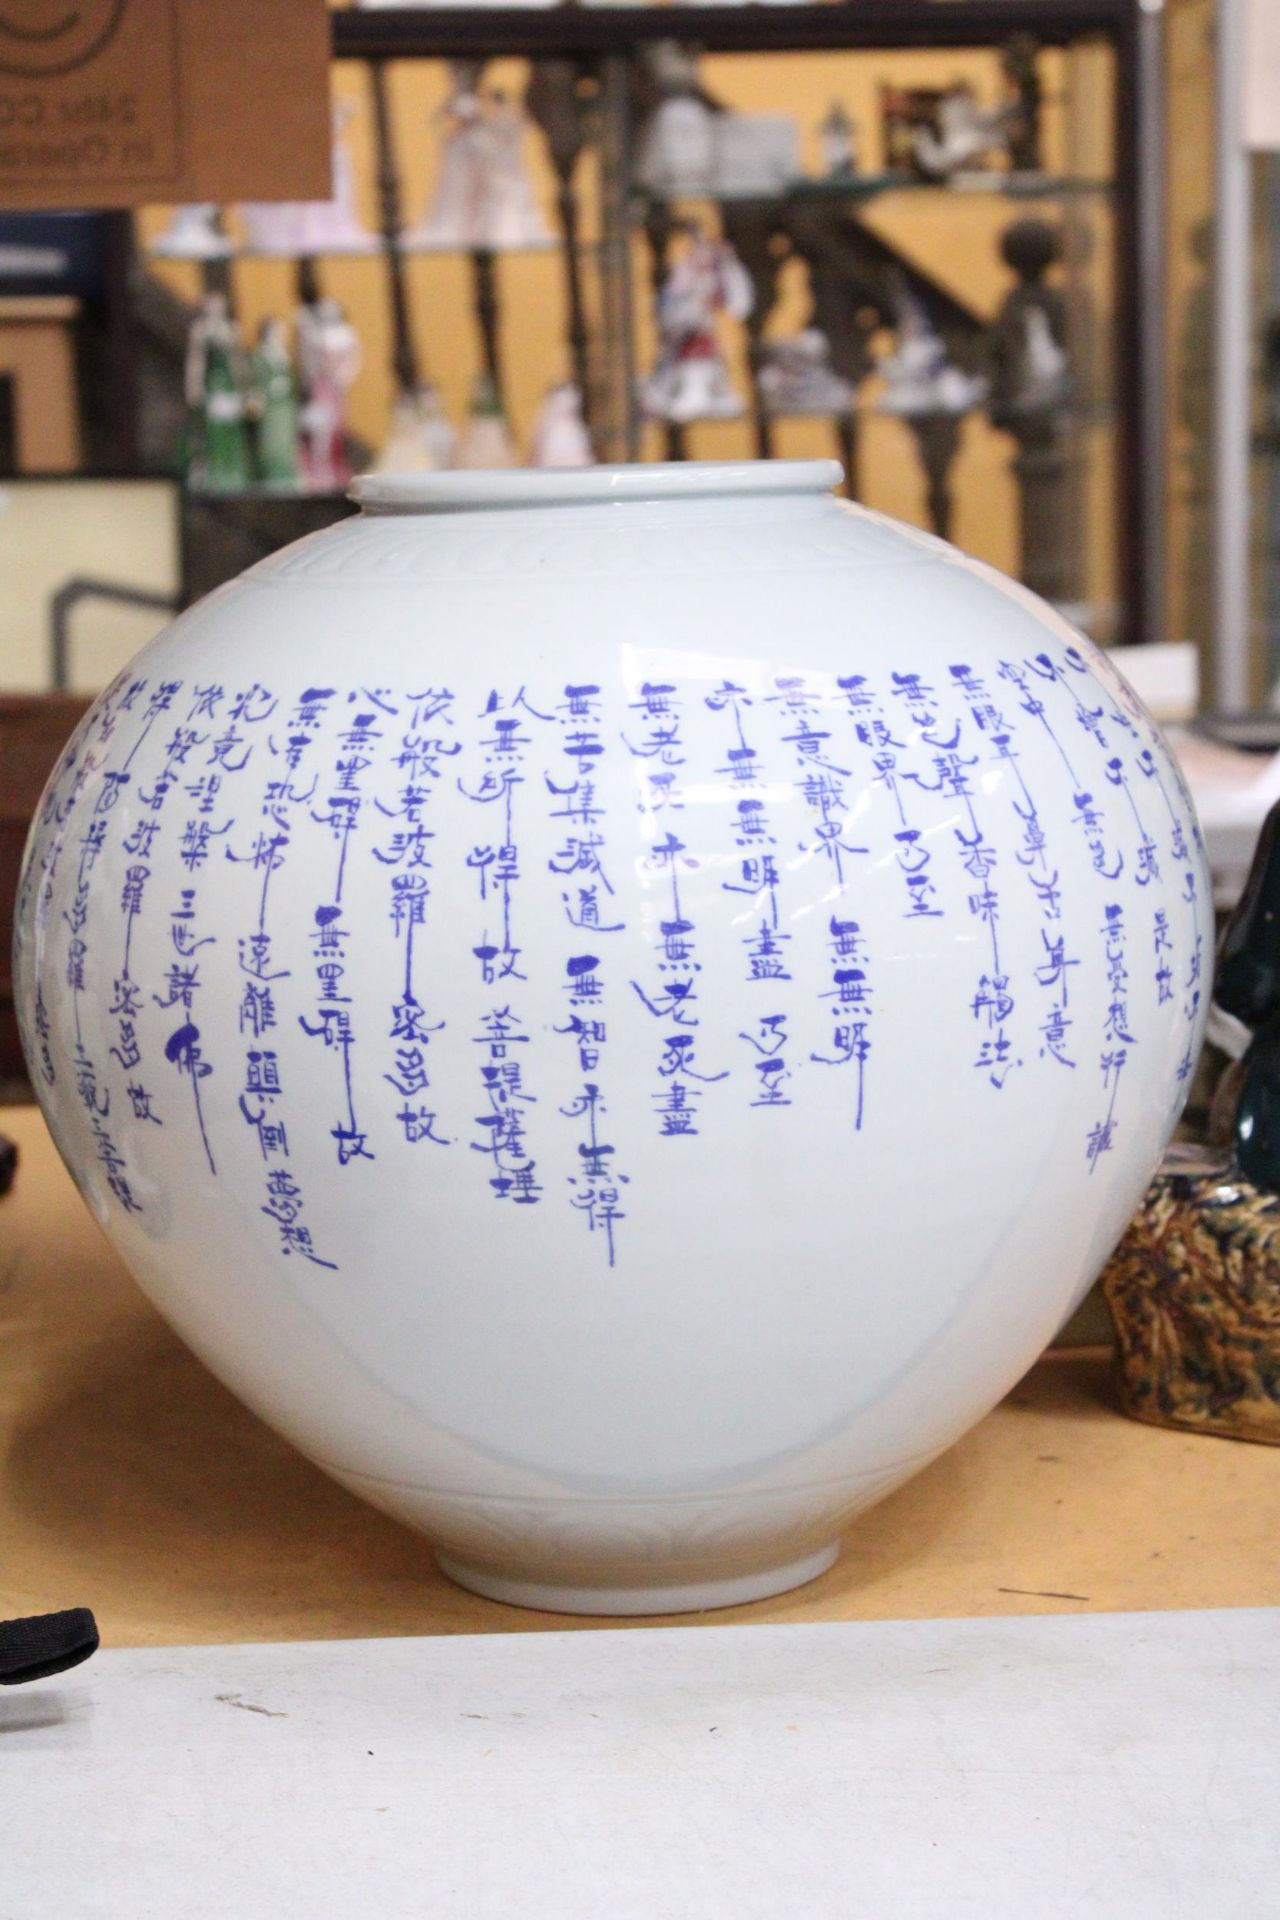 A LARGE CHINESE BLUE AND WHITE VASE WITH INSCRIPTIONS - Image 2 of 6